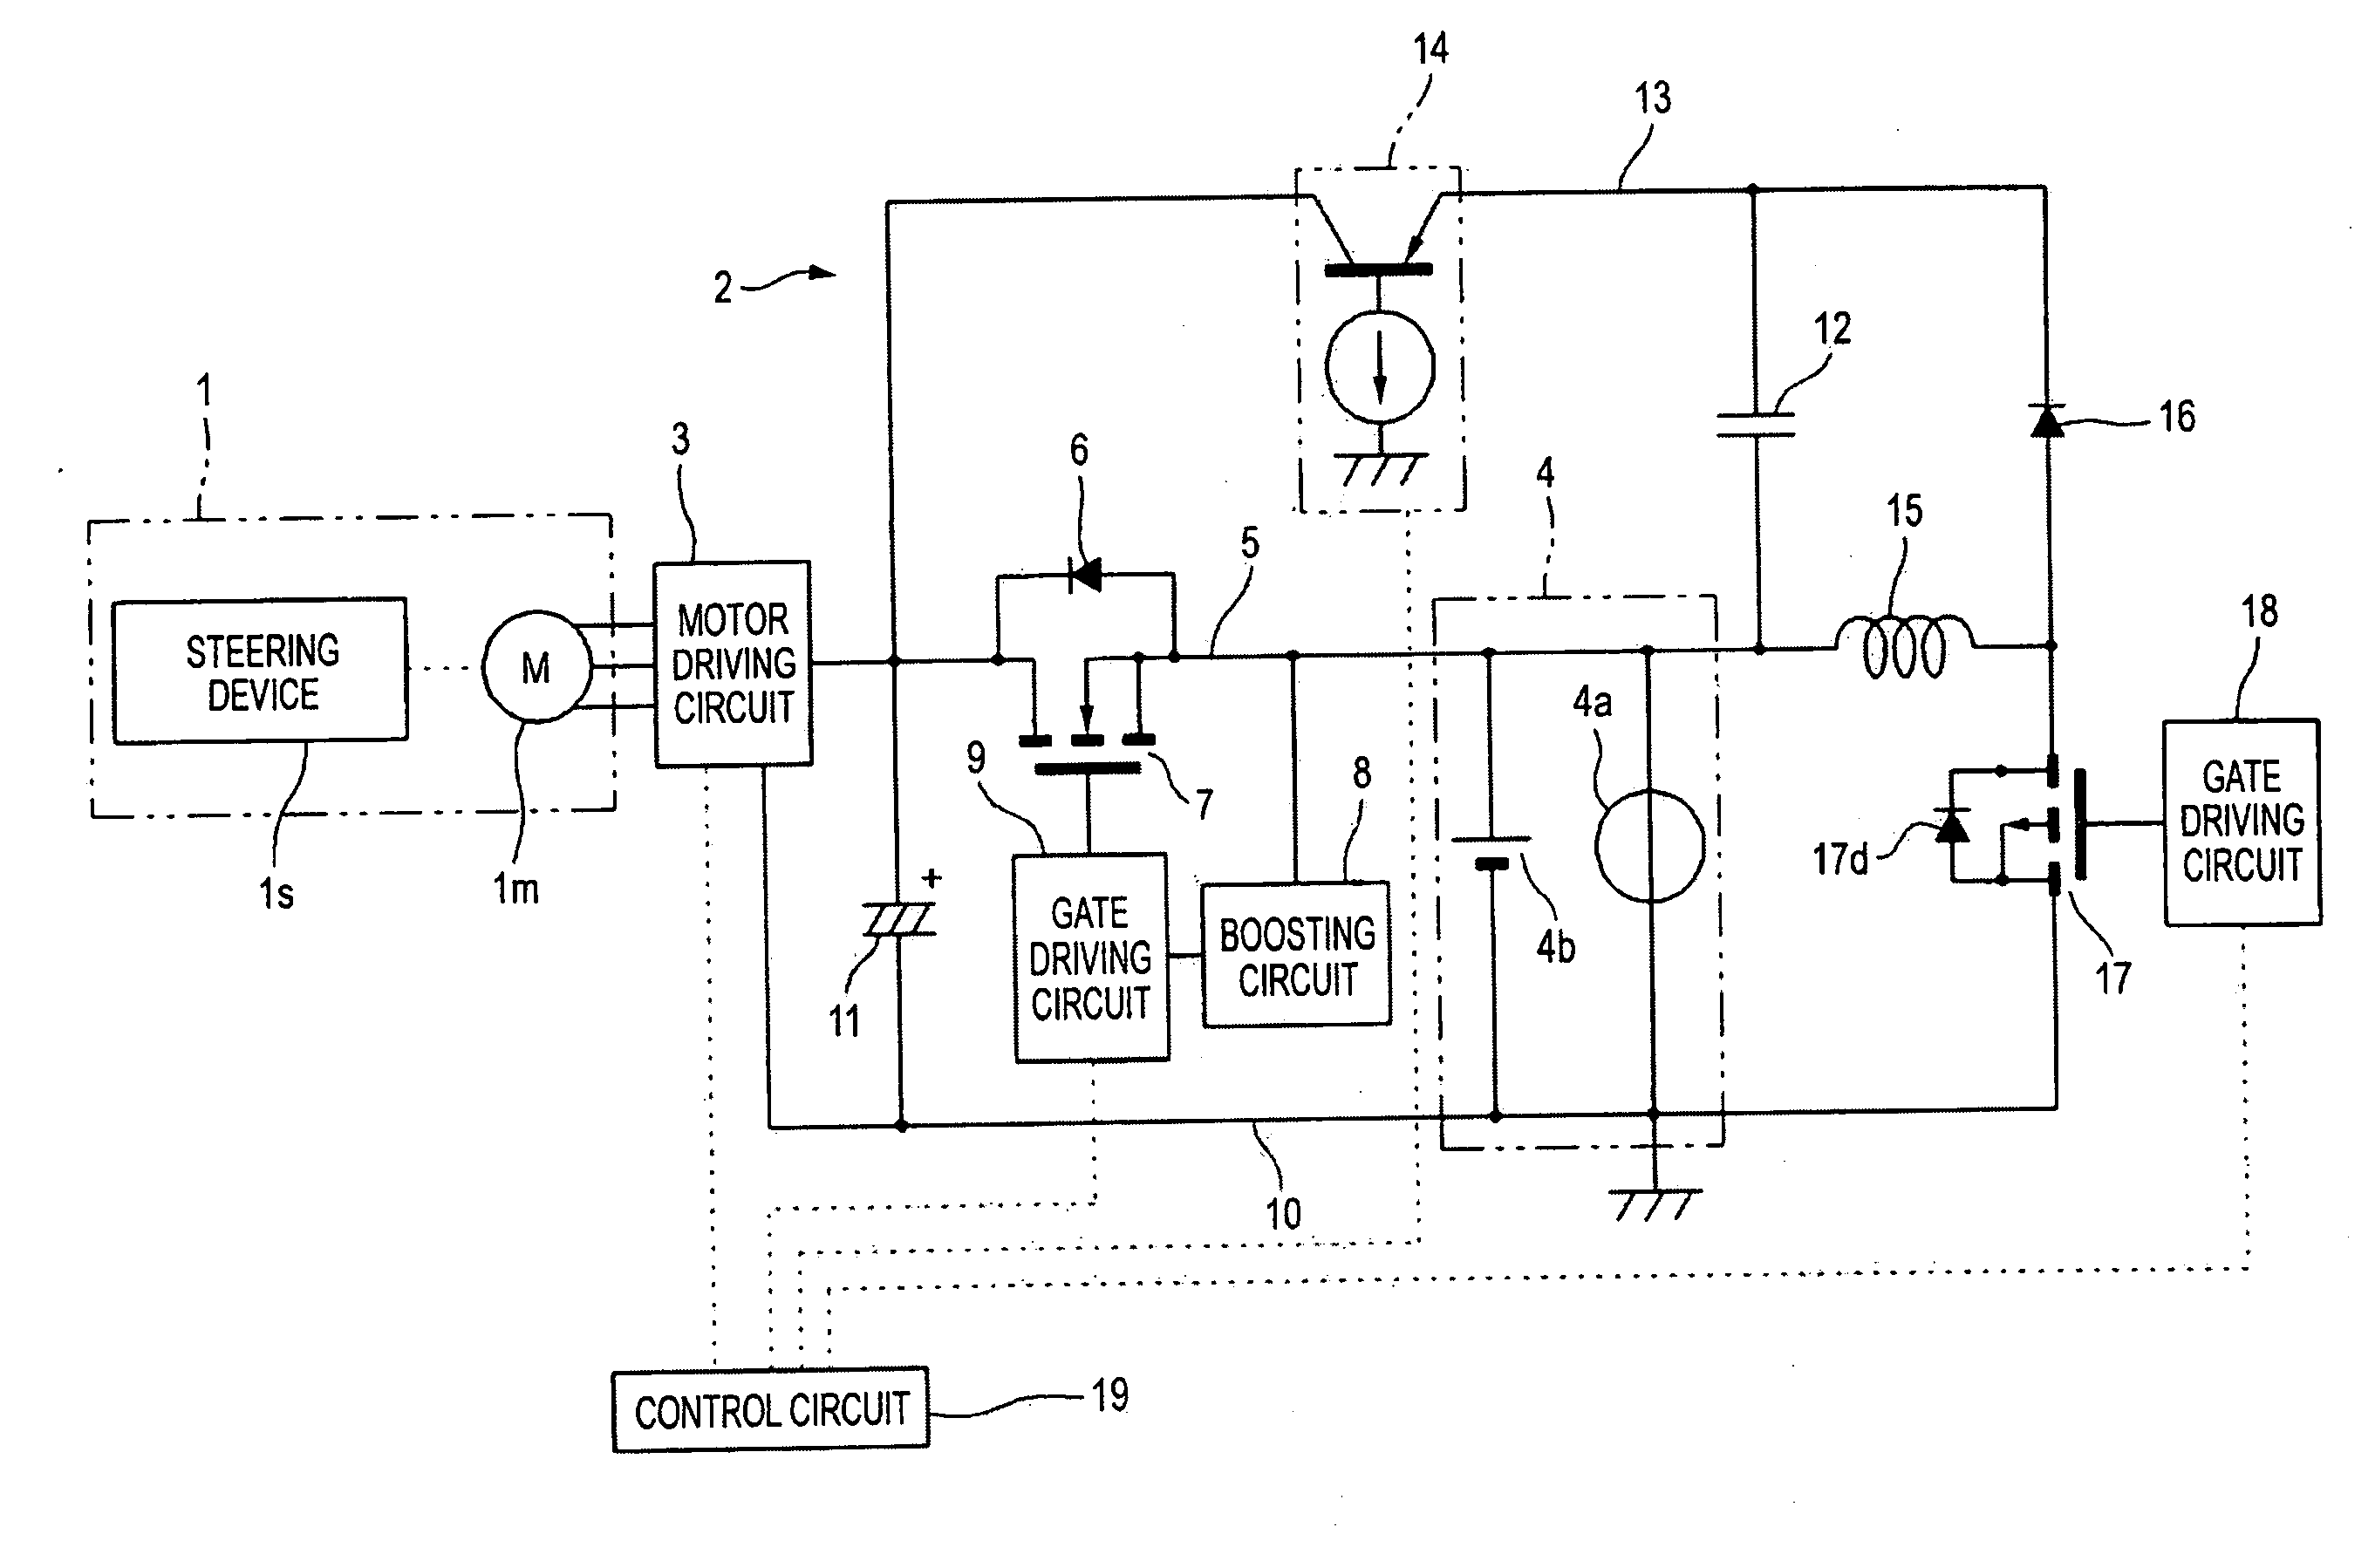 Motor controller of electric power steering device